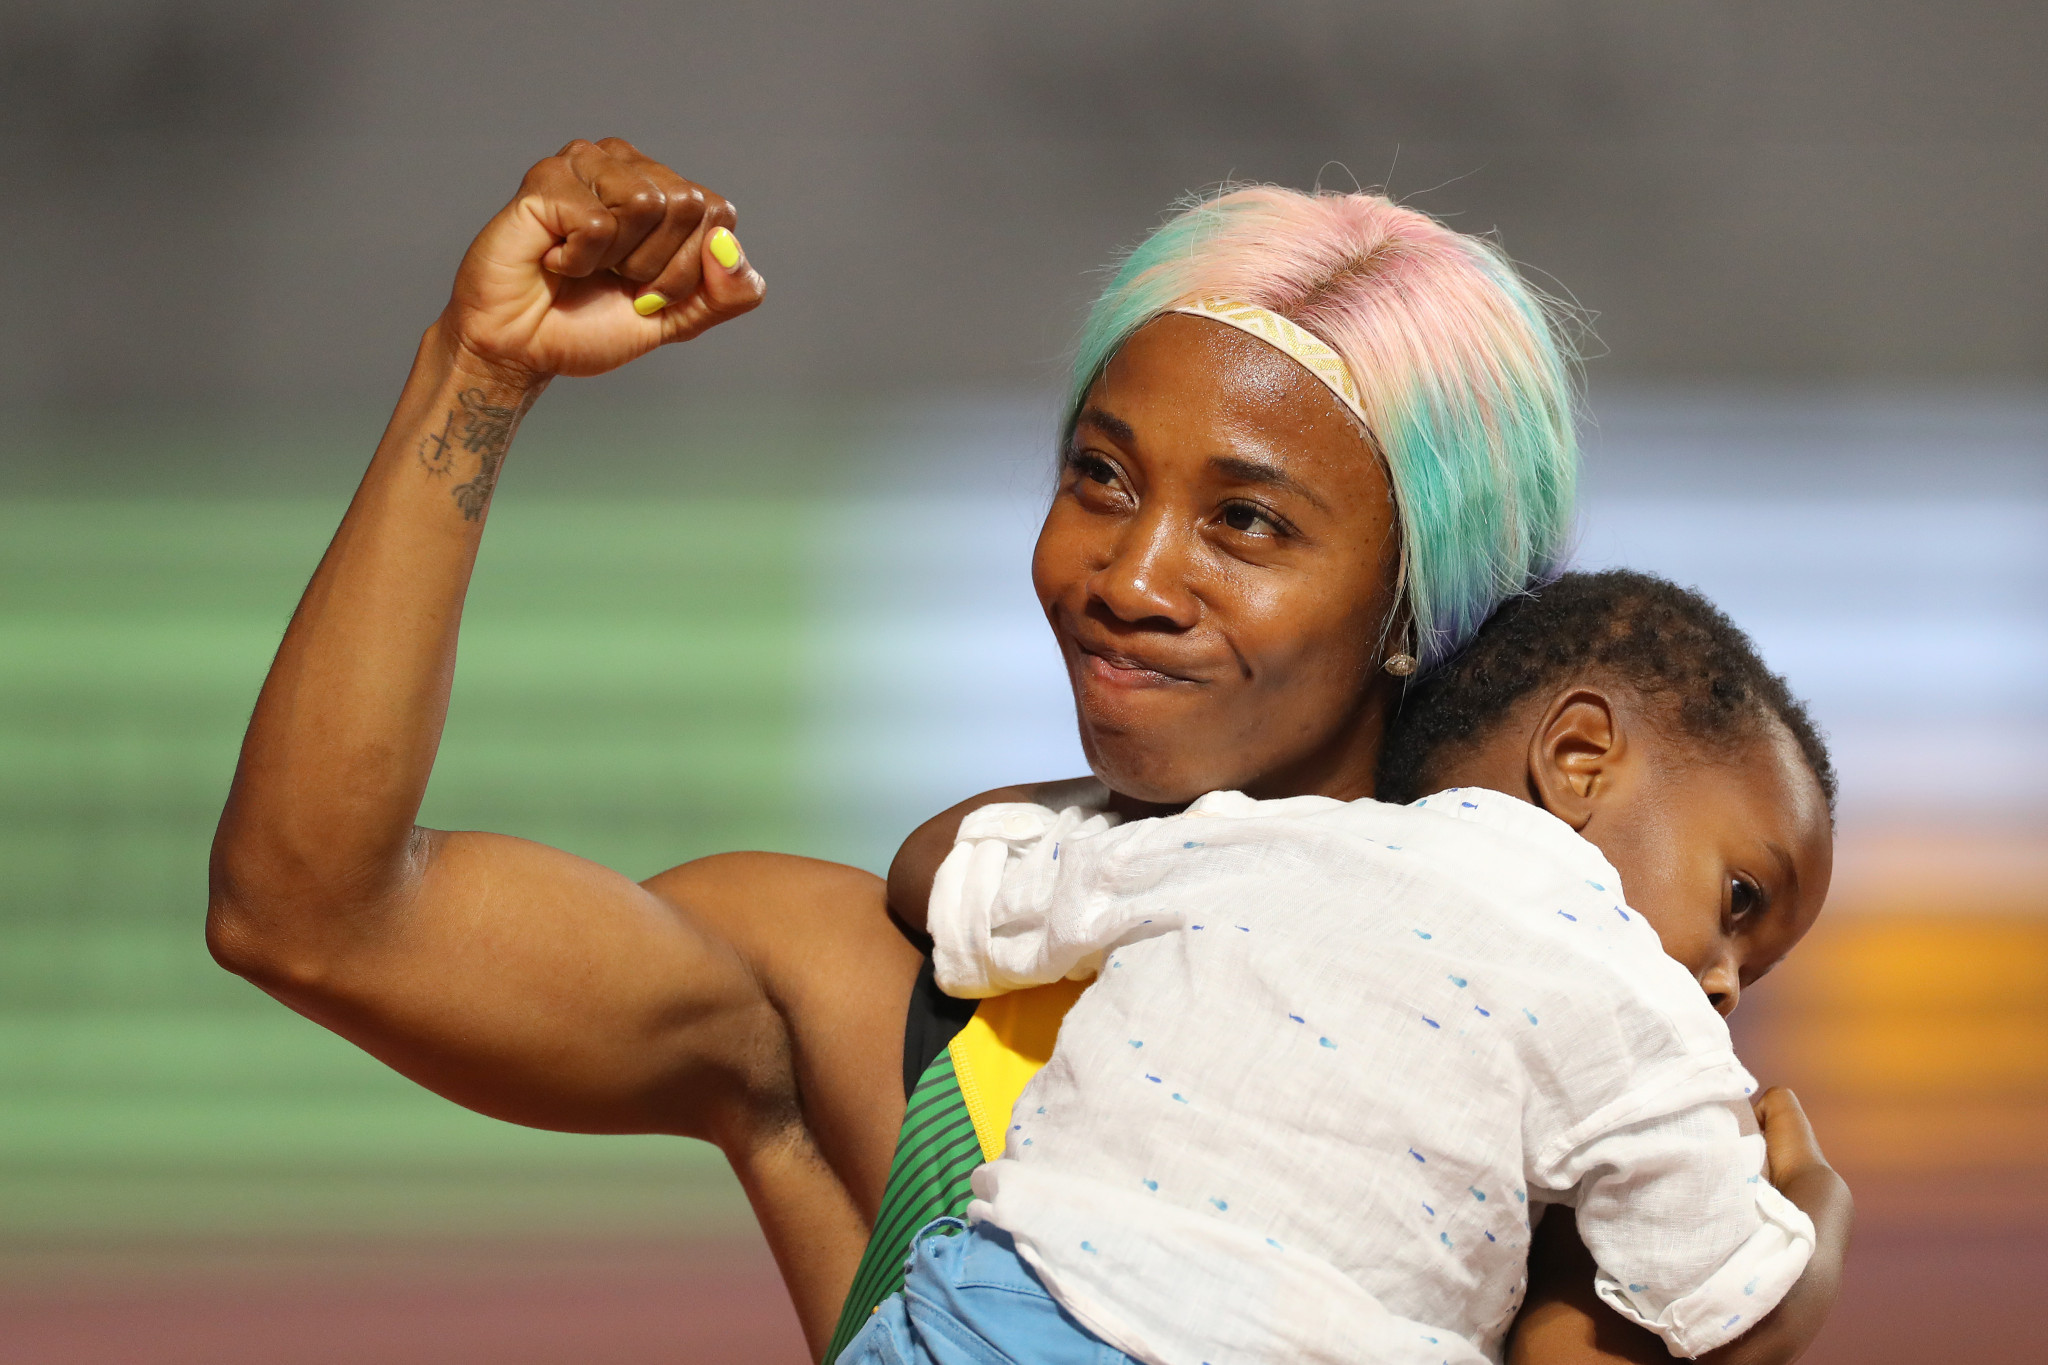 Shelly-Ann Fraser-Pryce back on top of the world after pregnant pause